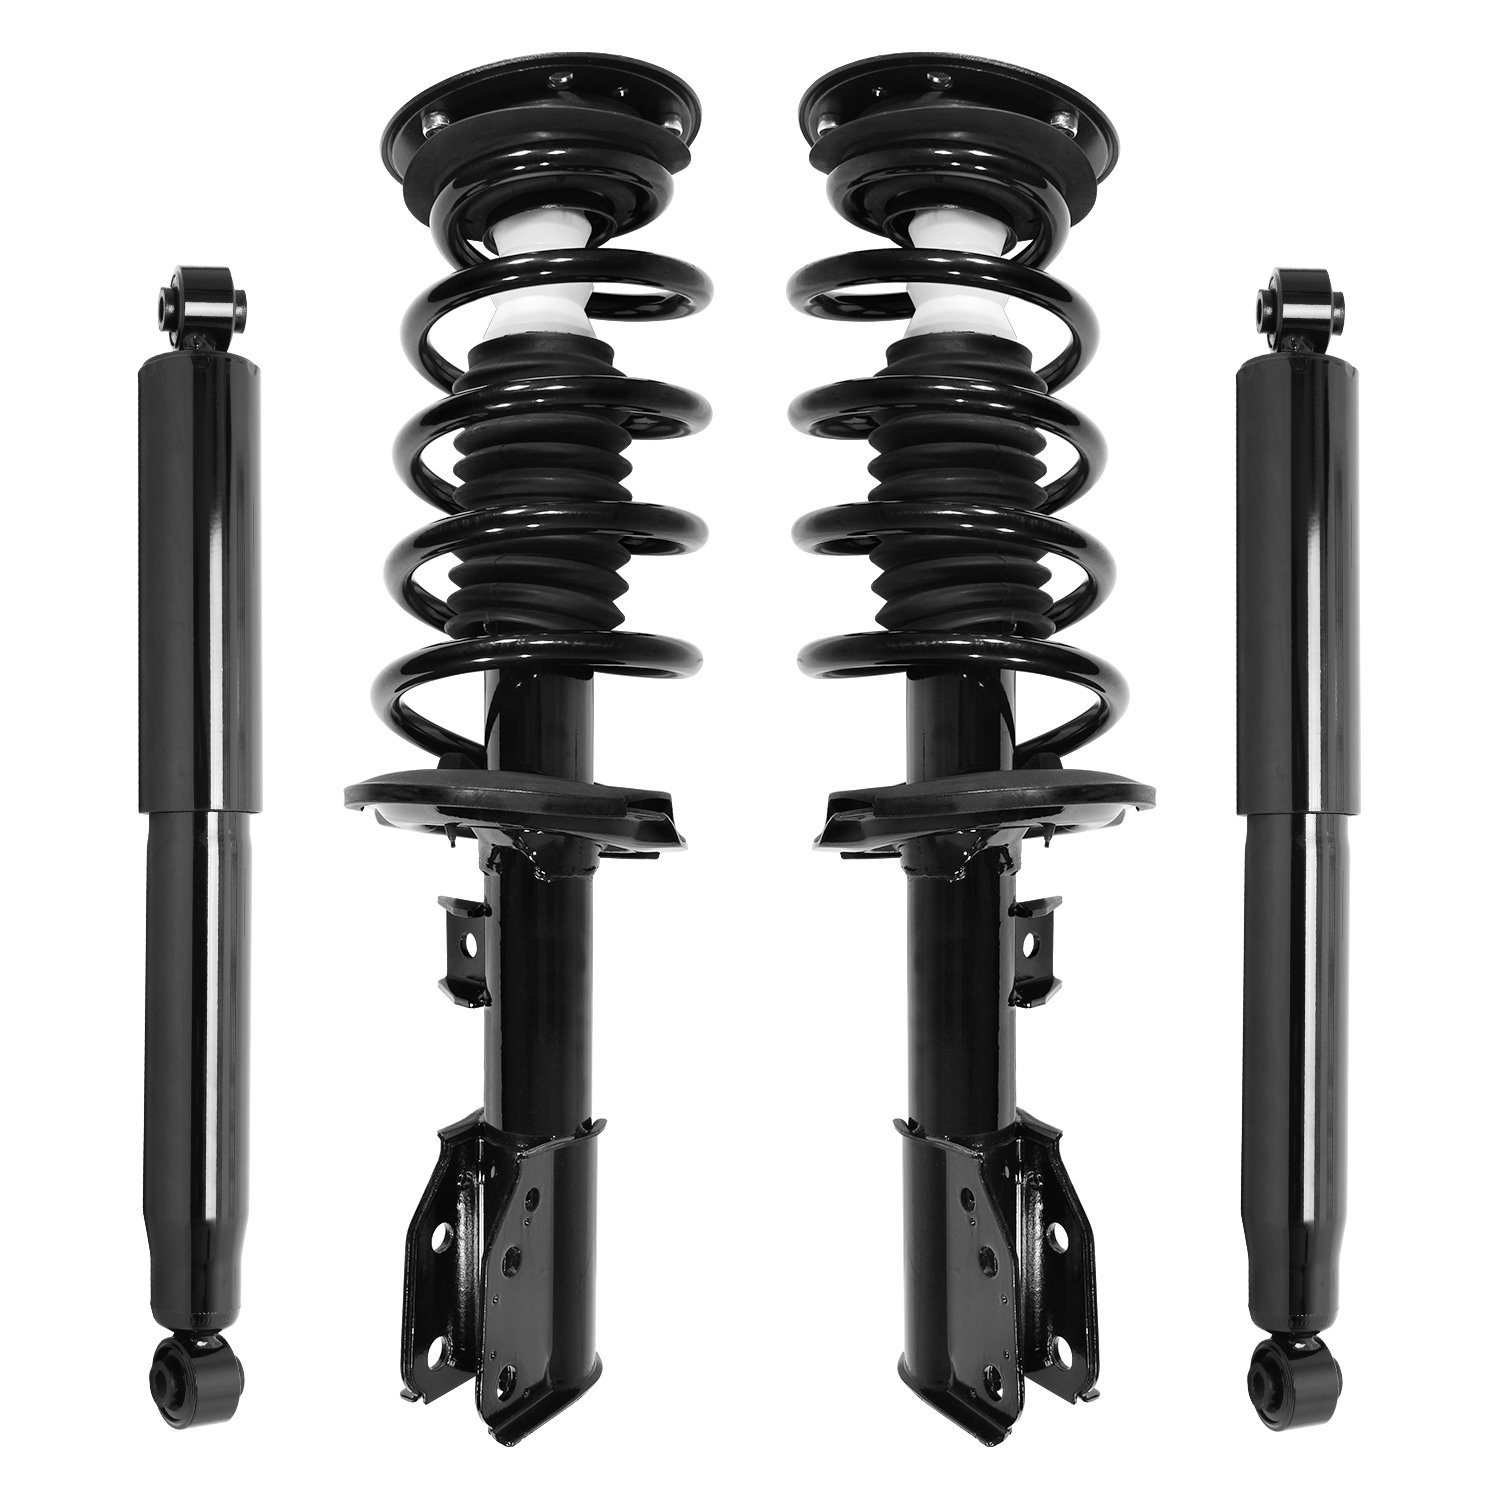 4-11873-251140-001 Front & Rear Suspension Strut & Coil Spring Assembly Fits Select GM